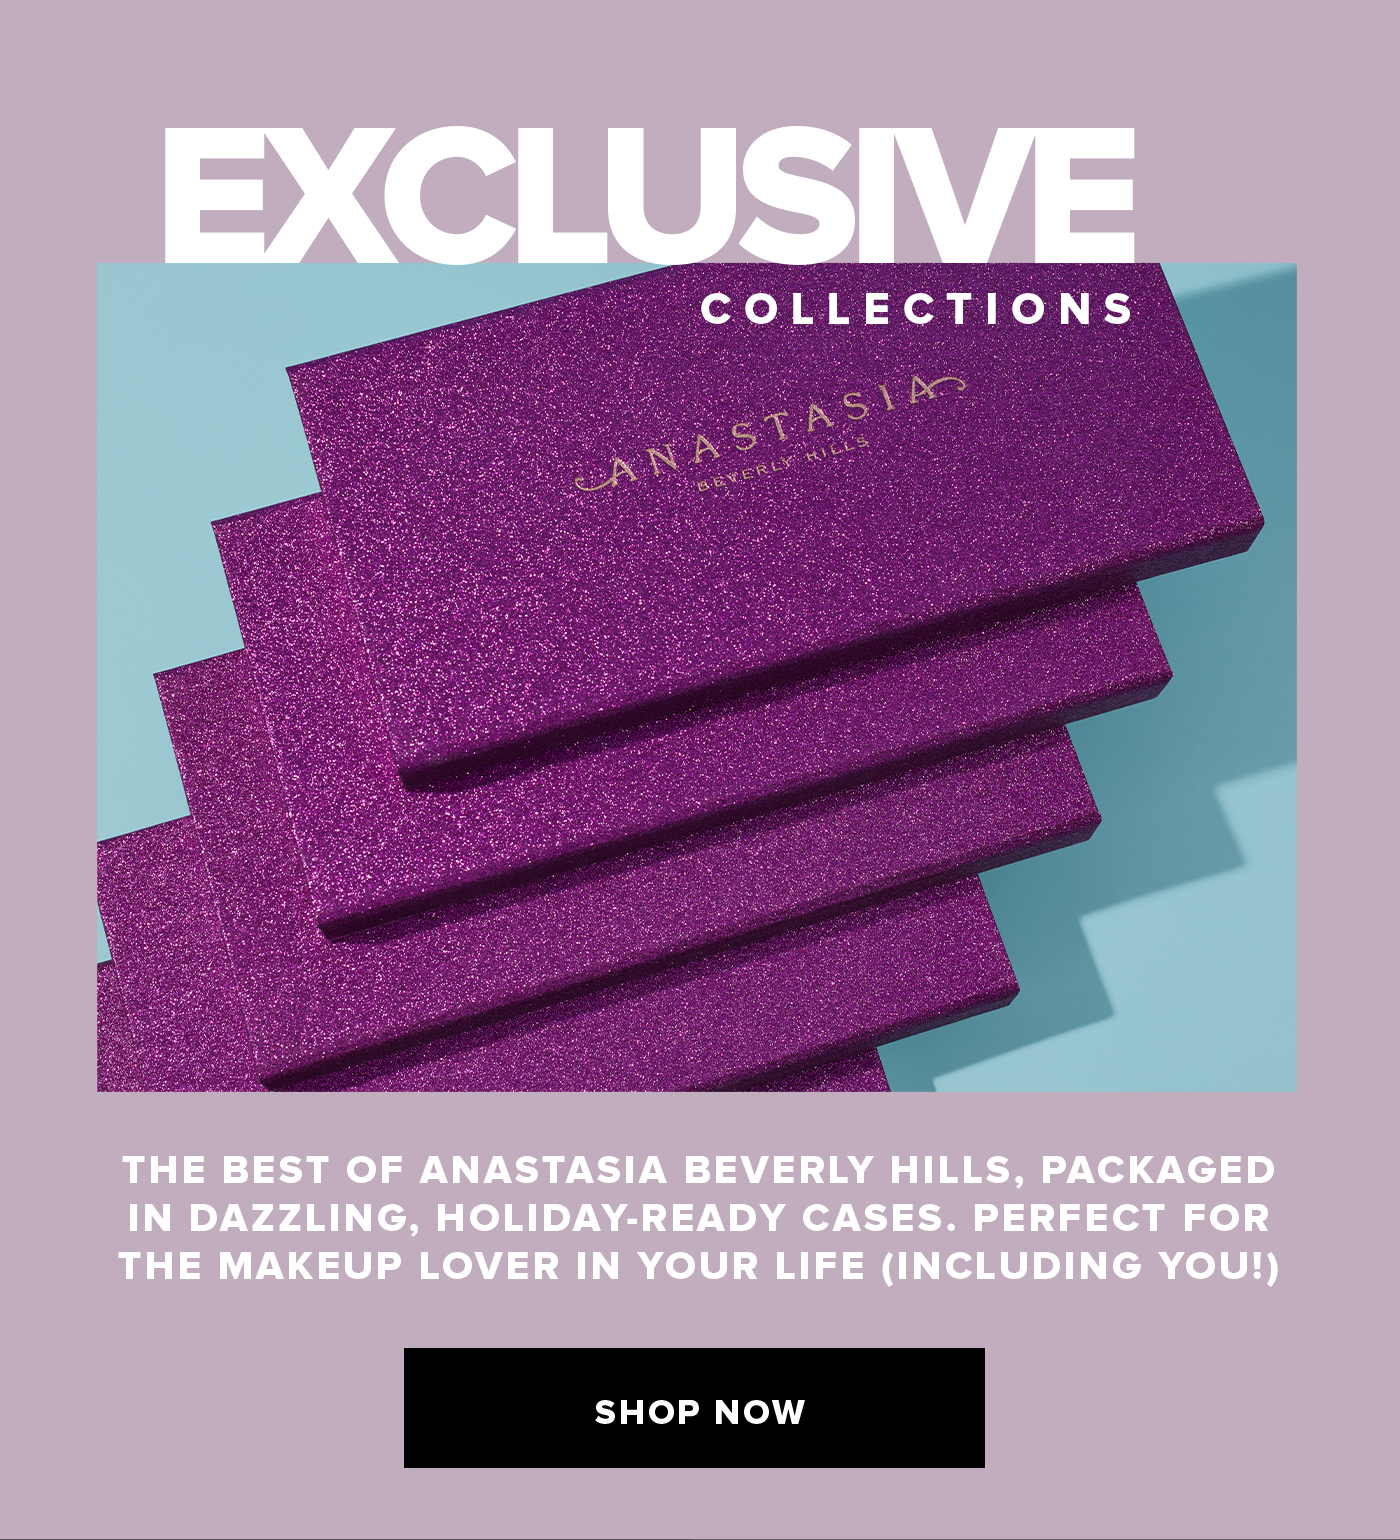 EXCLUSIVE COLLECTONS THE BEST OF ANASTASIA BEVERLY HILLS, PACKAGED IN DAZZLING, HOLIDAY-READY CASES. PERFECT FOR THE MAKEUP LOVER IN YOUR LIFE (INCLUDING YOU!SHOP NOW